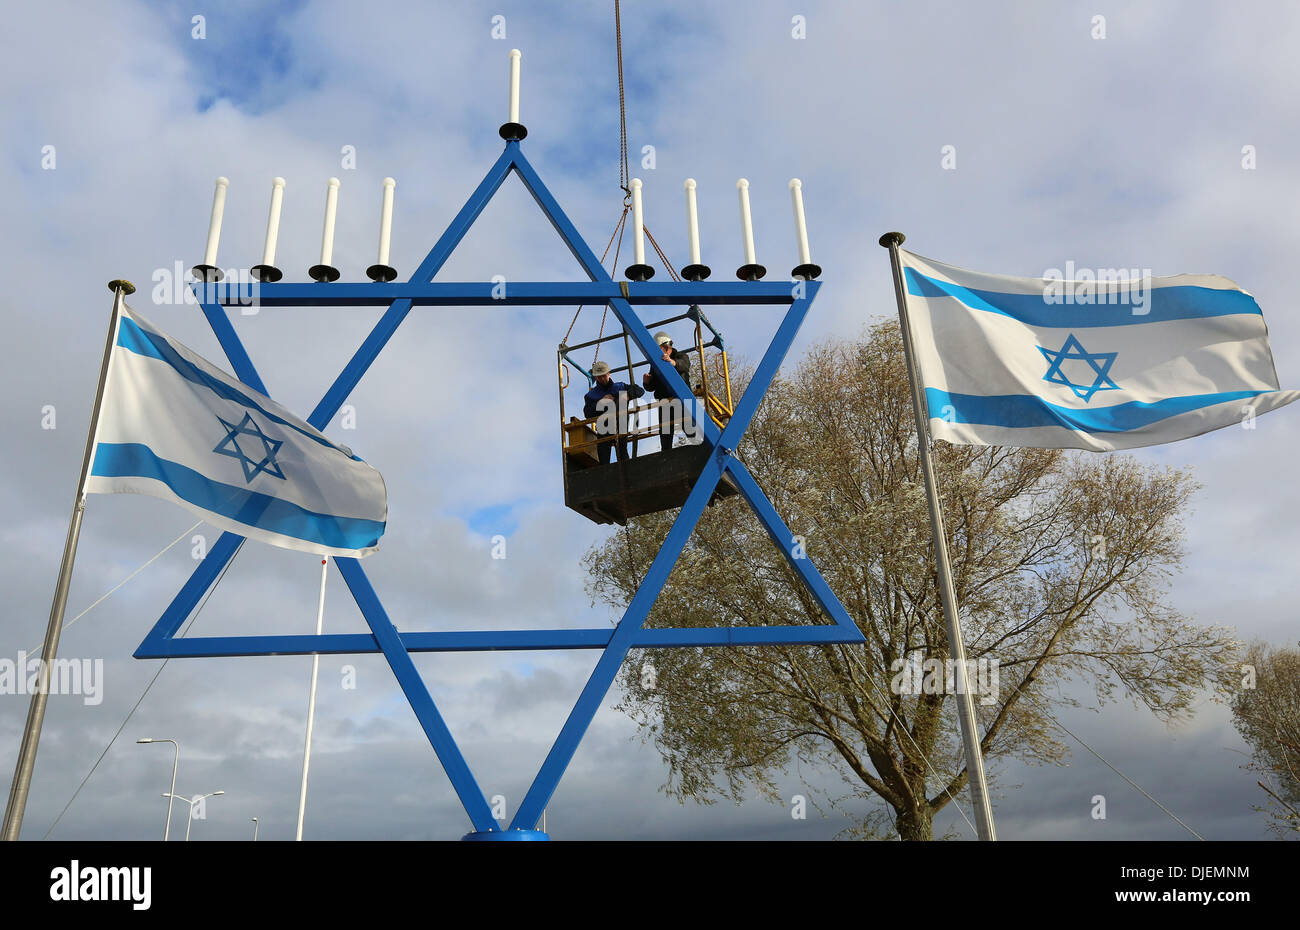 The largest chanoekia (menorah) of the world is since 25-11-2013 situated next to the building of the organization 'Christians for Israel' in the Dutch city Nijkerk. The nine-branched candelabrum in the form of the Star of David, is almost 12 meters high. The first candle will ligted up Wednesday 27-11-2013 at the start of the Jewish festival of lights, Hanukkah (commemoration of the dedication of the temple in the year 164 BC). The nine-branched candelabrum refers to the menorah in the Temple in Jerusalem, which miraculously kept burning for eight days on the oil for just one day. Foto: VidiP Stock Photo